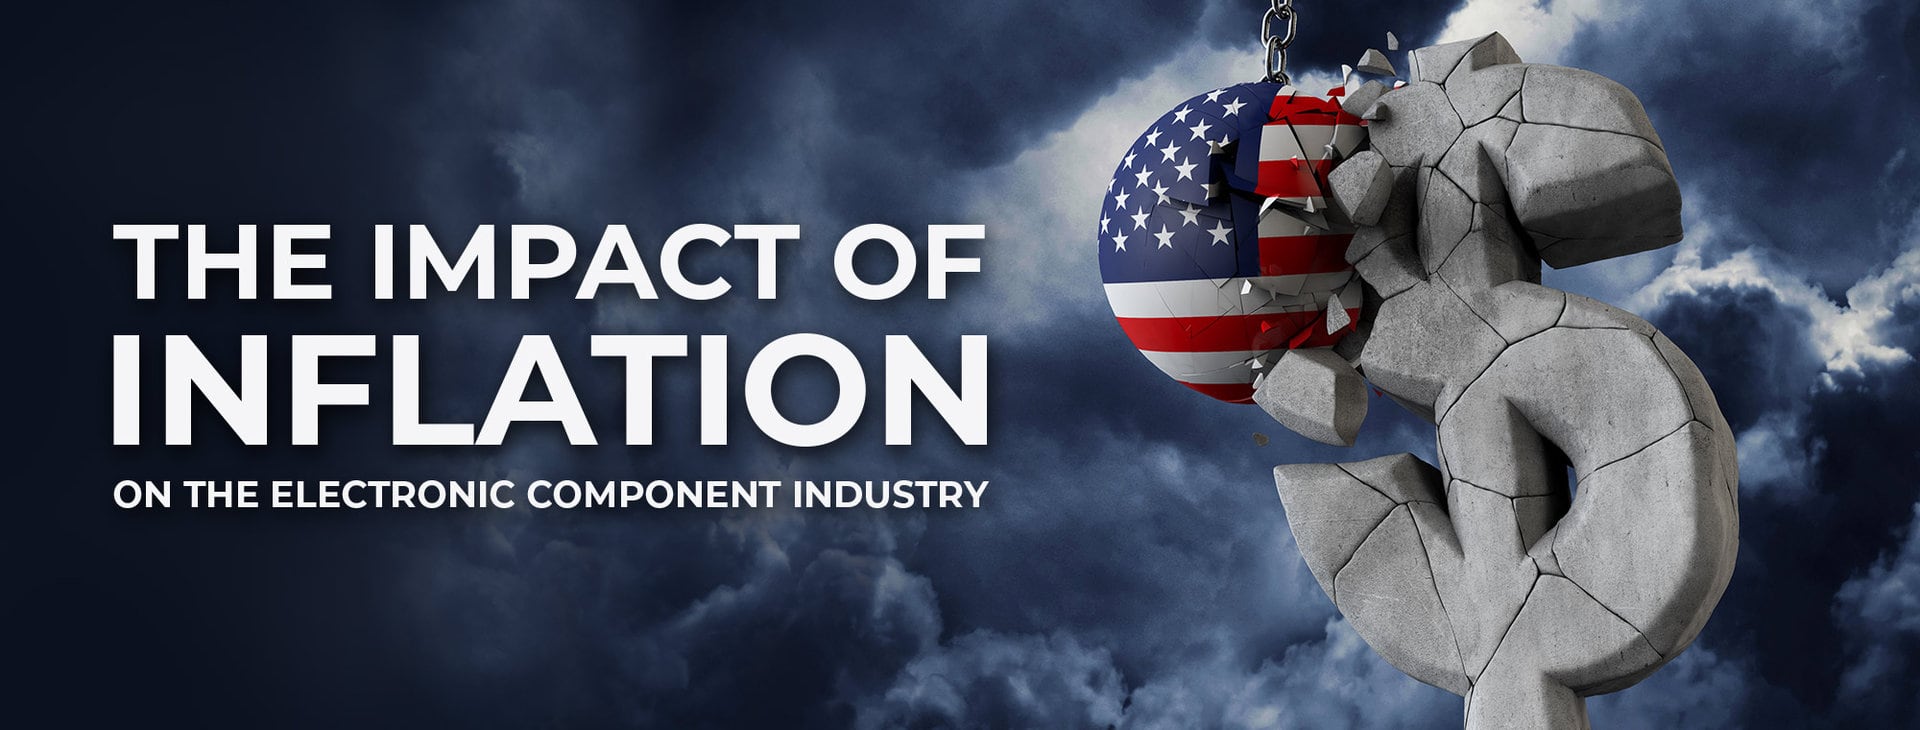 The Impact of Inflation on the Electronic Component Industry